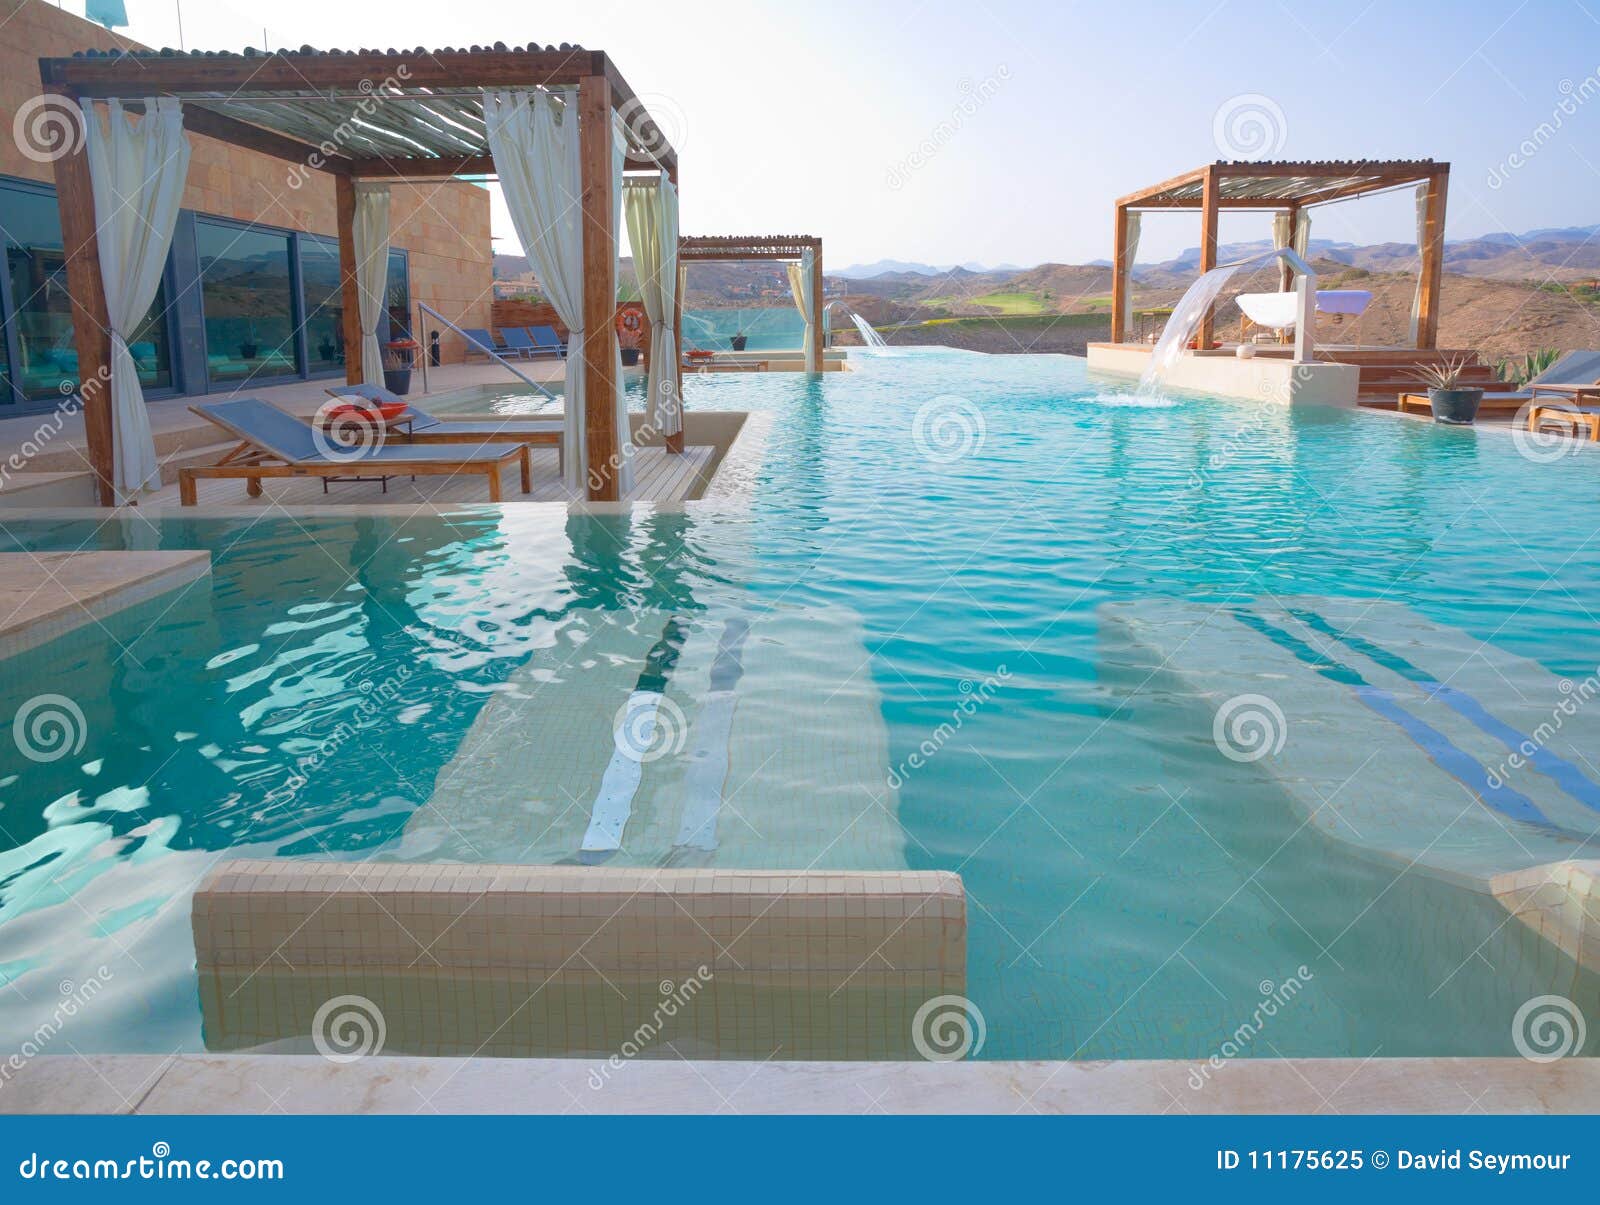 Outdoor Pool Spa with Pergolas in a Luxury hotel.